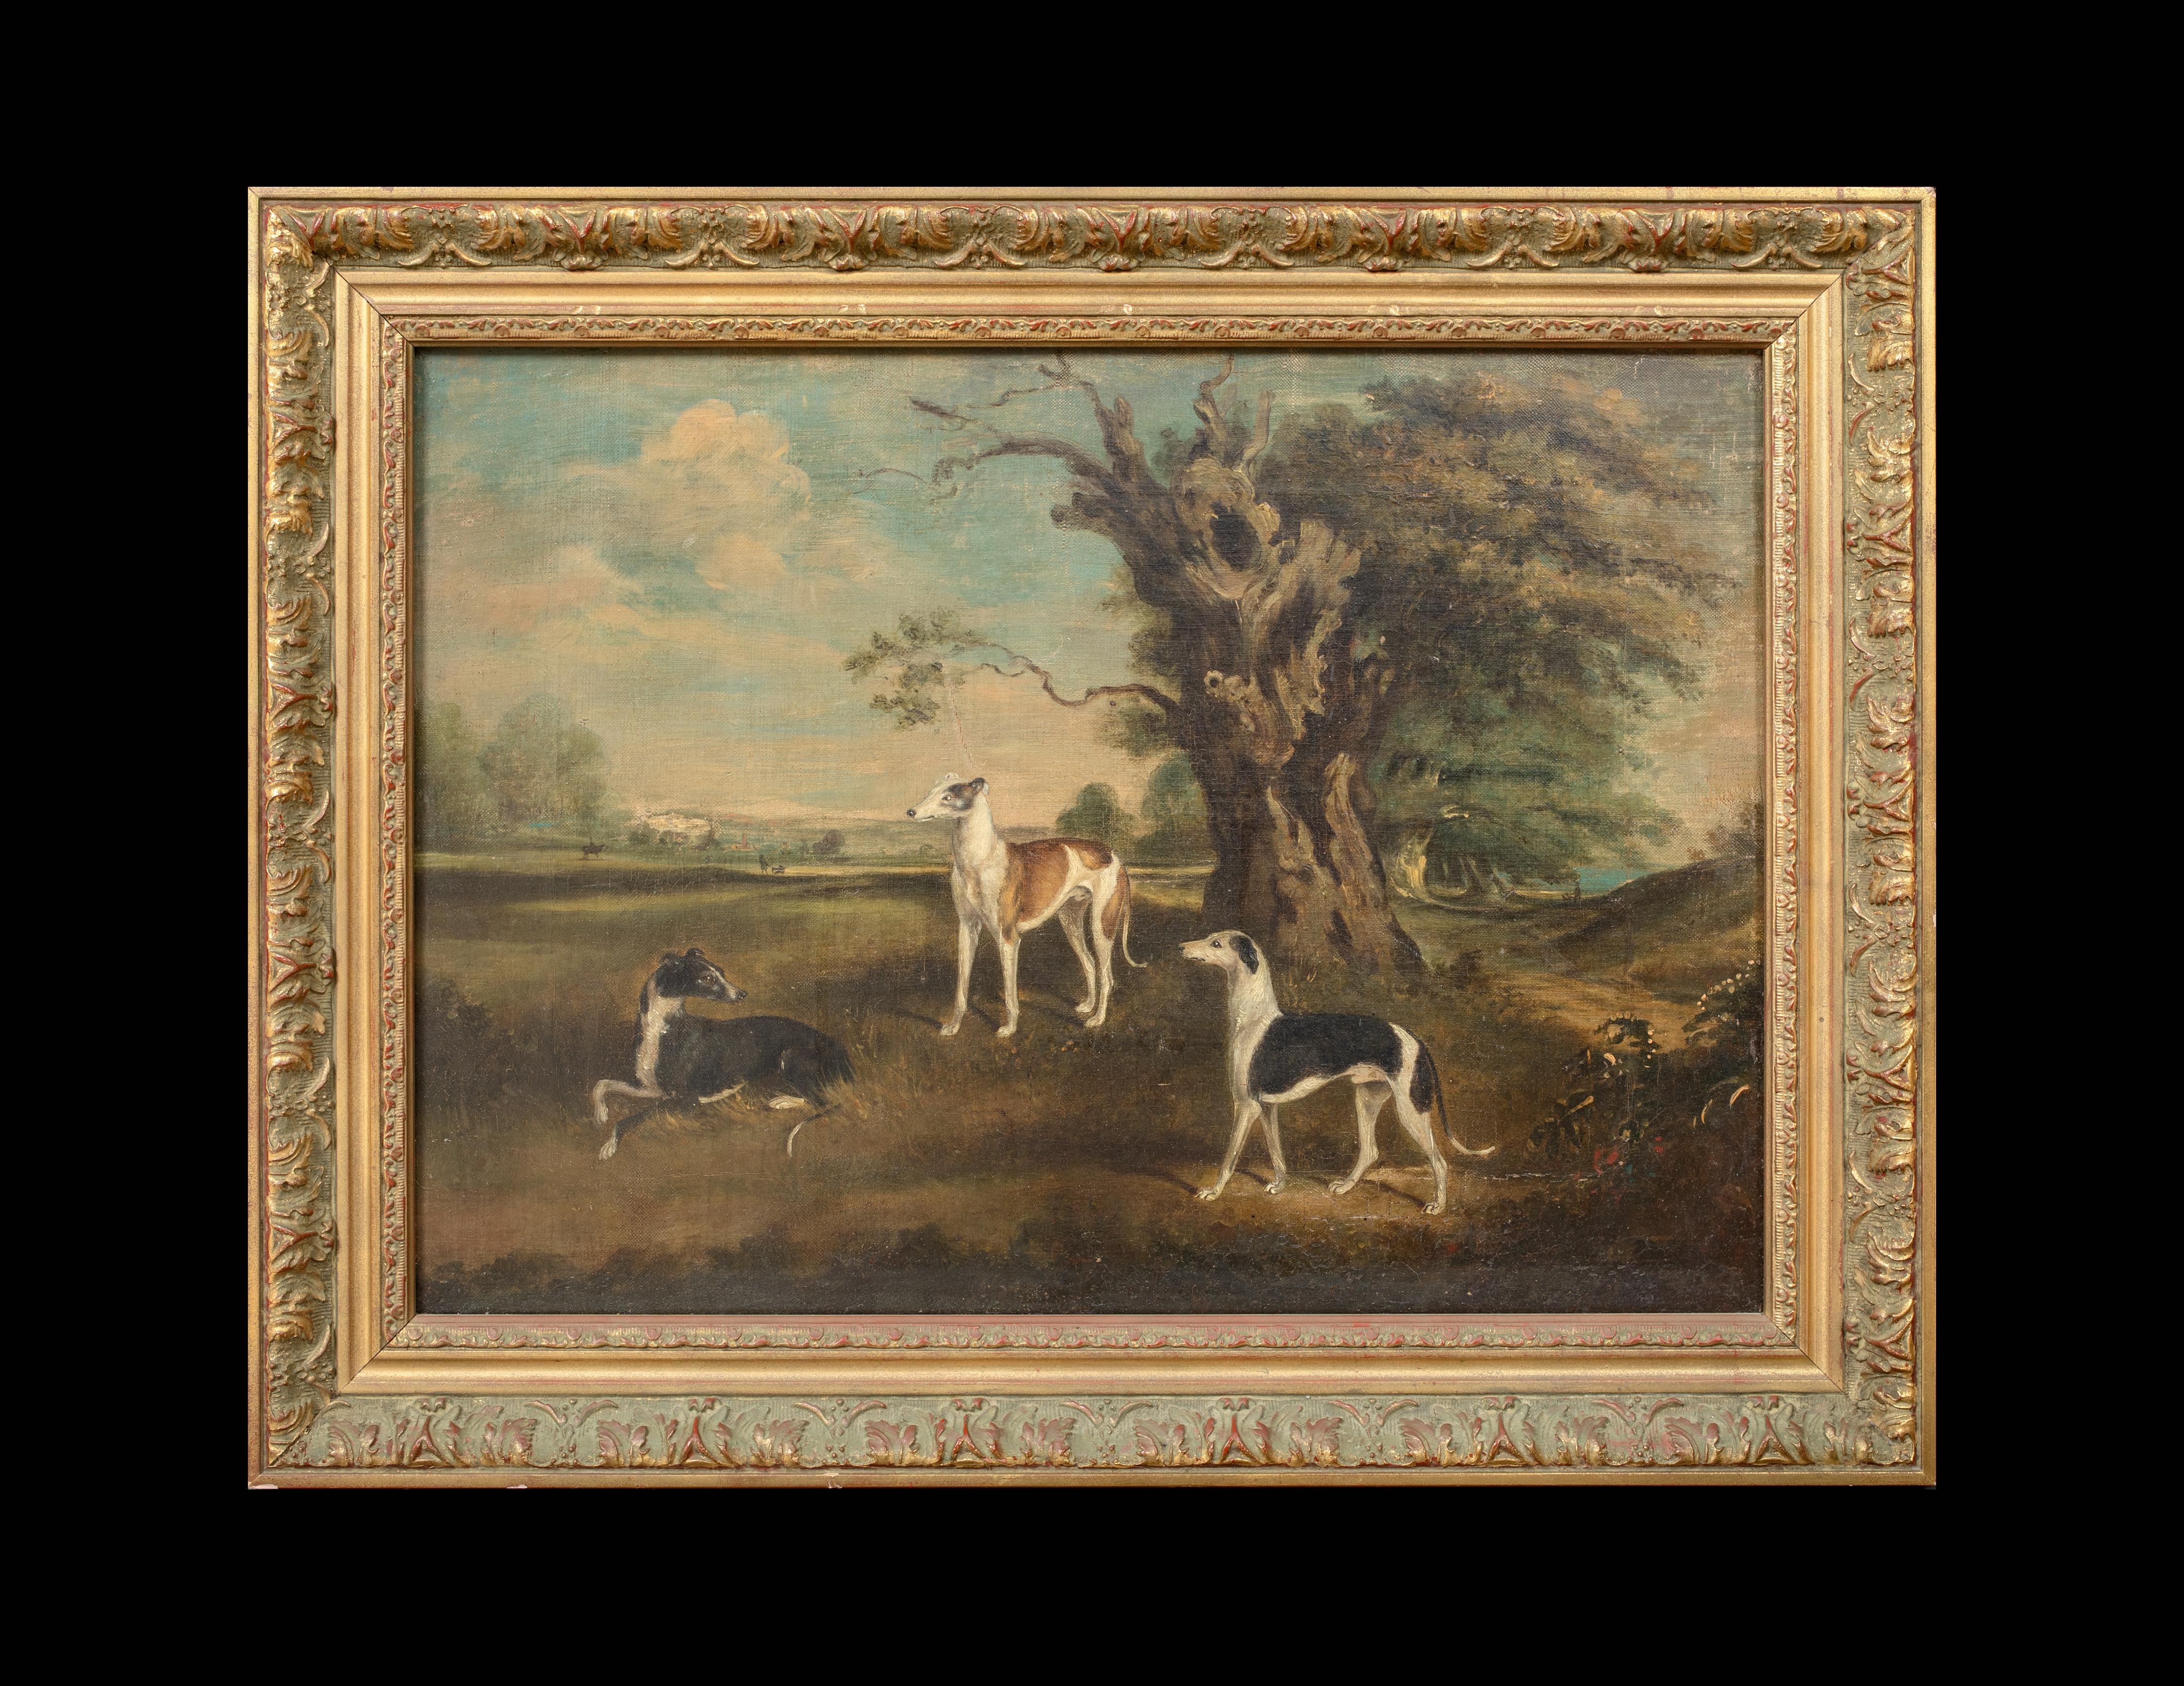 The Favourites Of The Earl Of Orford - 3 Greyhounds In A Landscape 18th Century - Painting by George Garrard